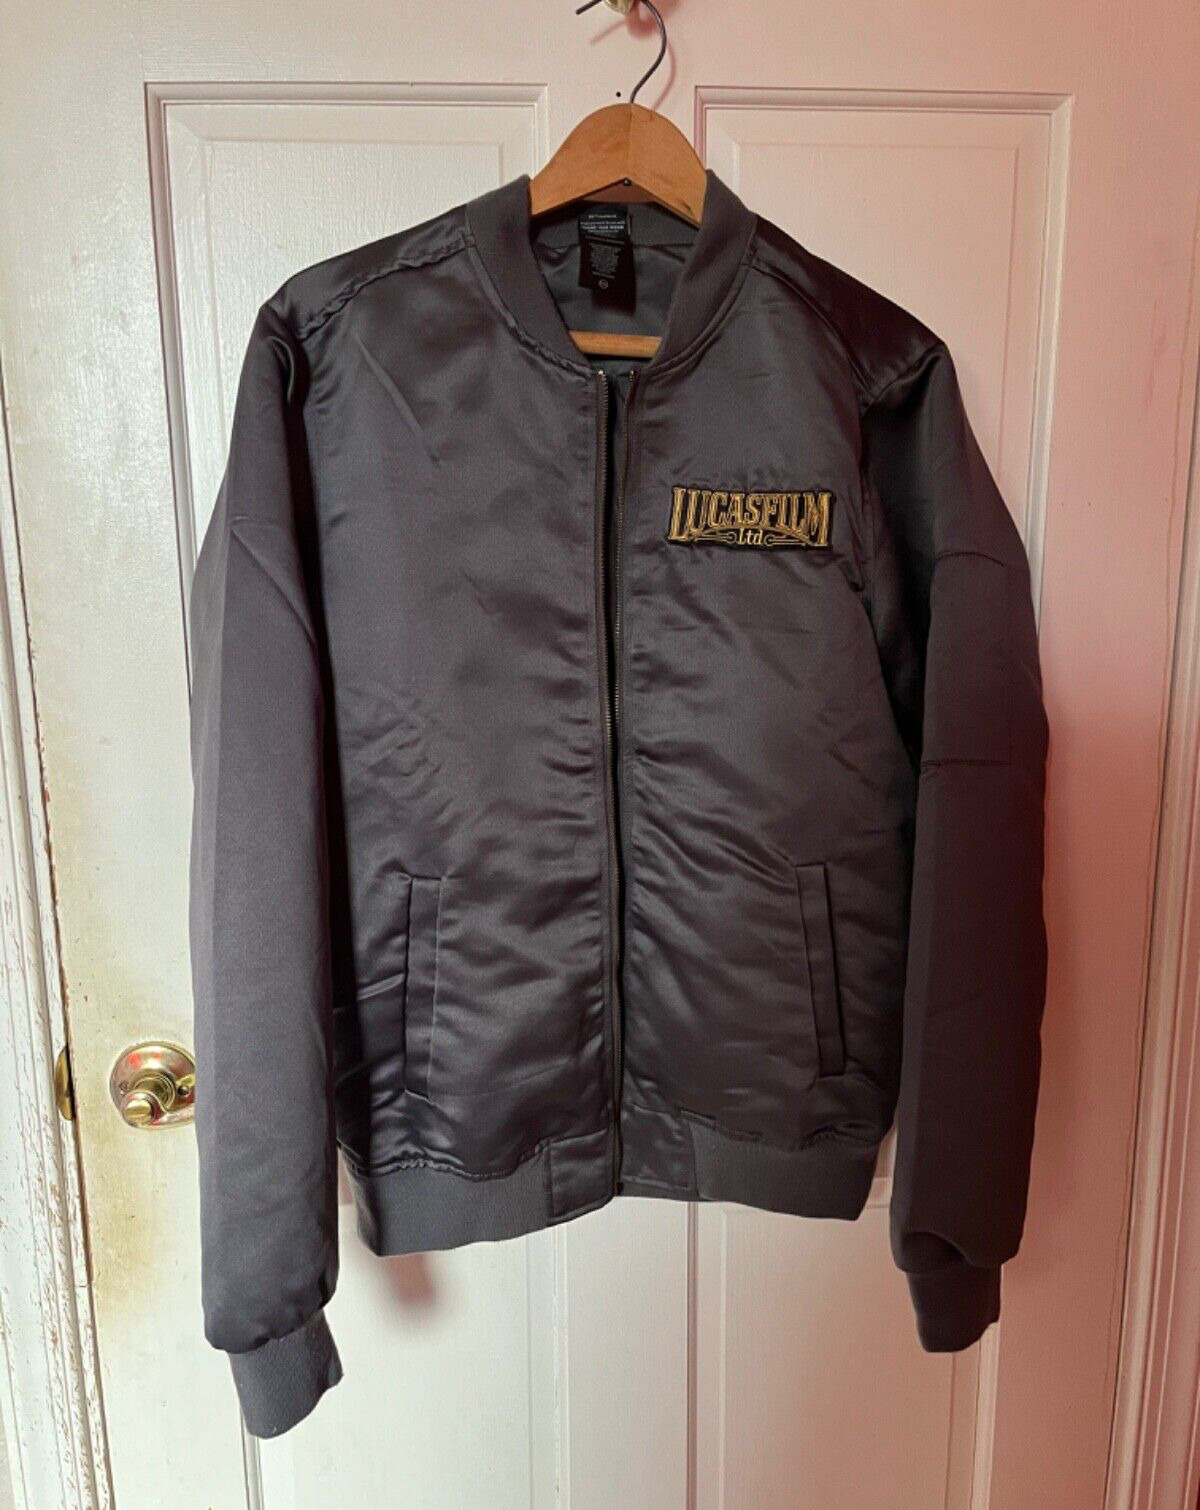 RARE Lucasfilm 50th Anniversary size Medium Bomber Jacket Our Universe Exclusive